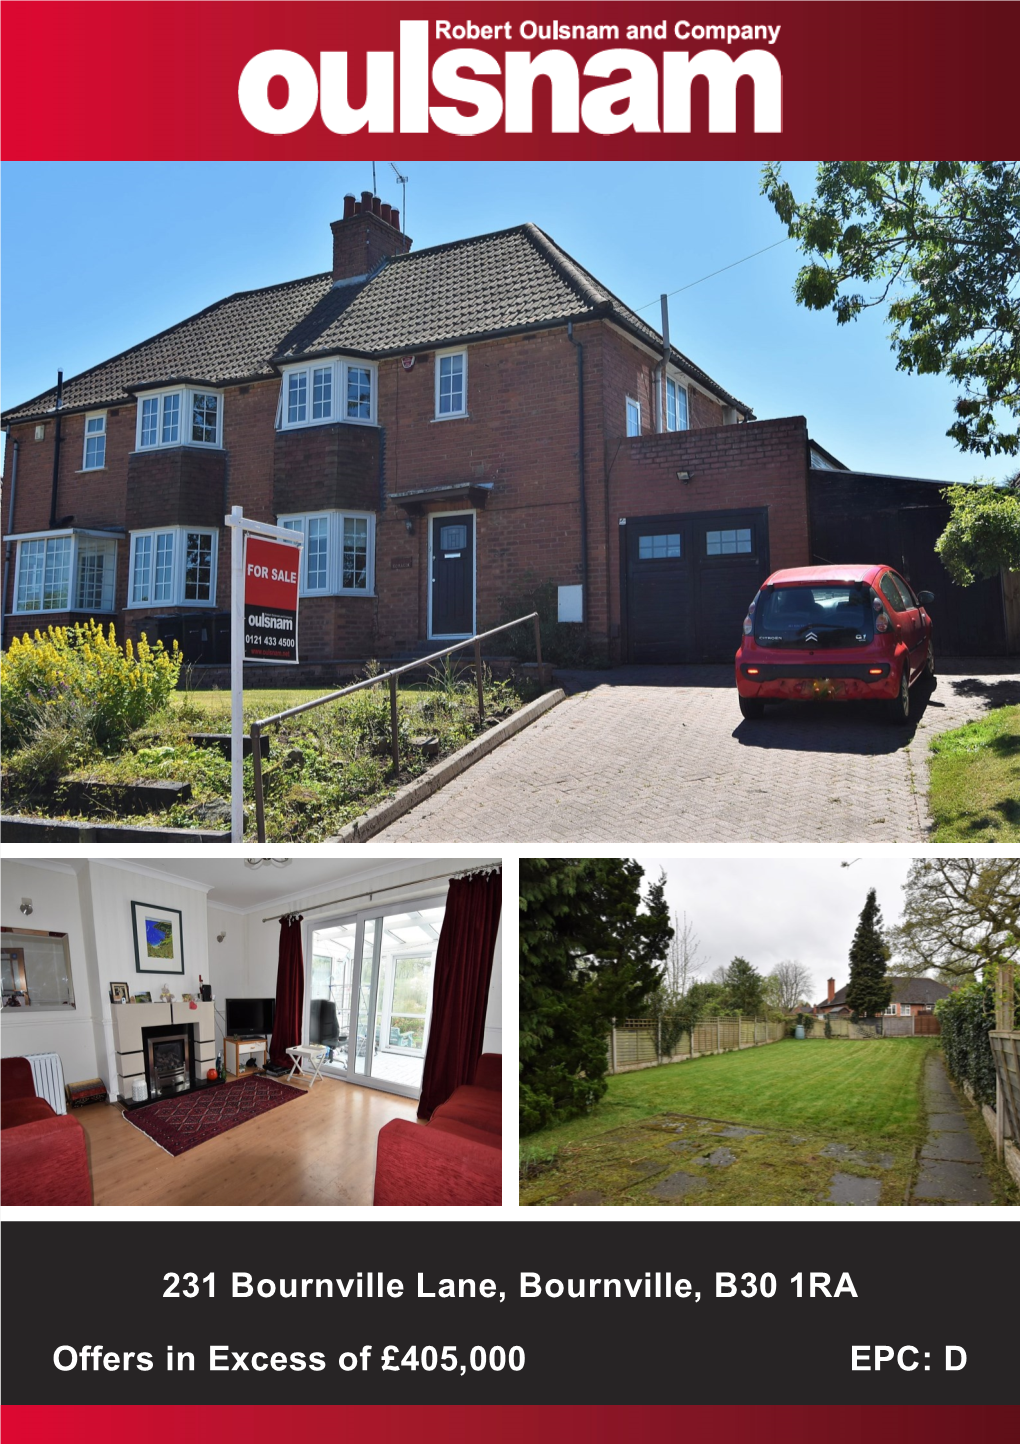 231 Bournville Lane, Bournville, B30 1RA Offers in Excess of £405,000